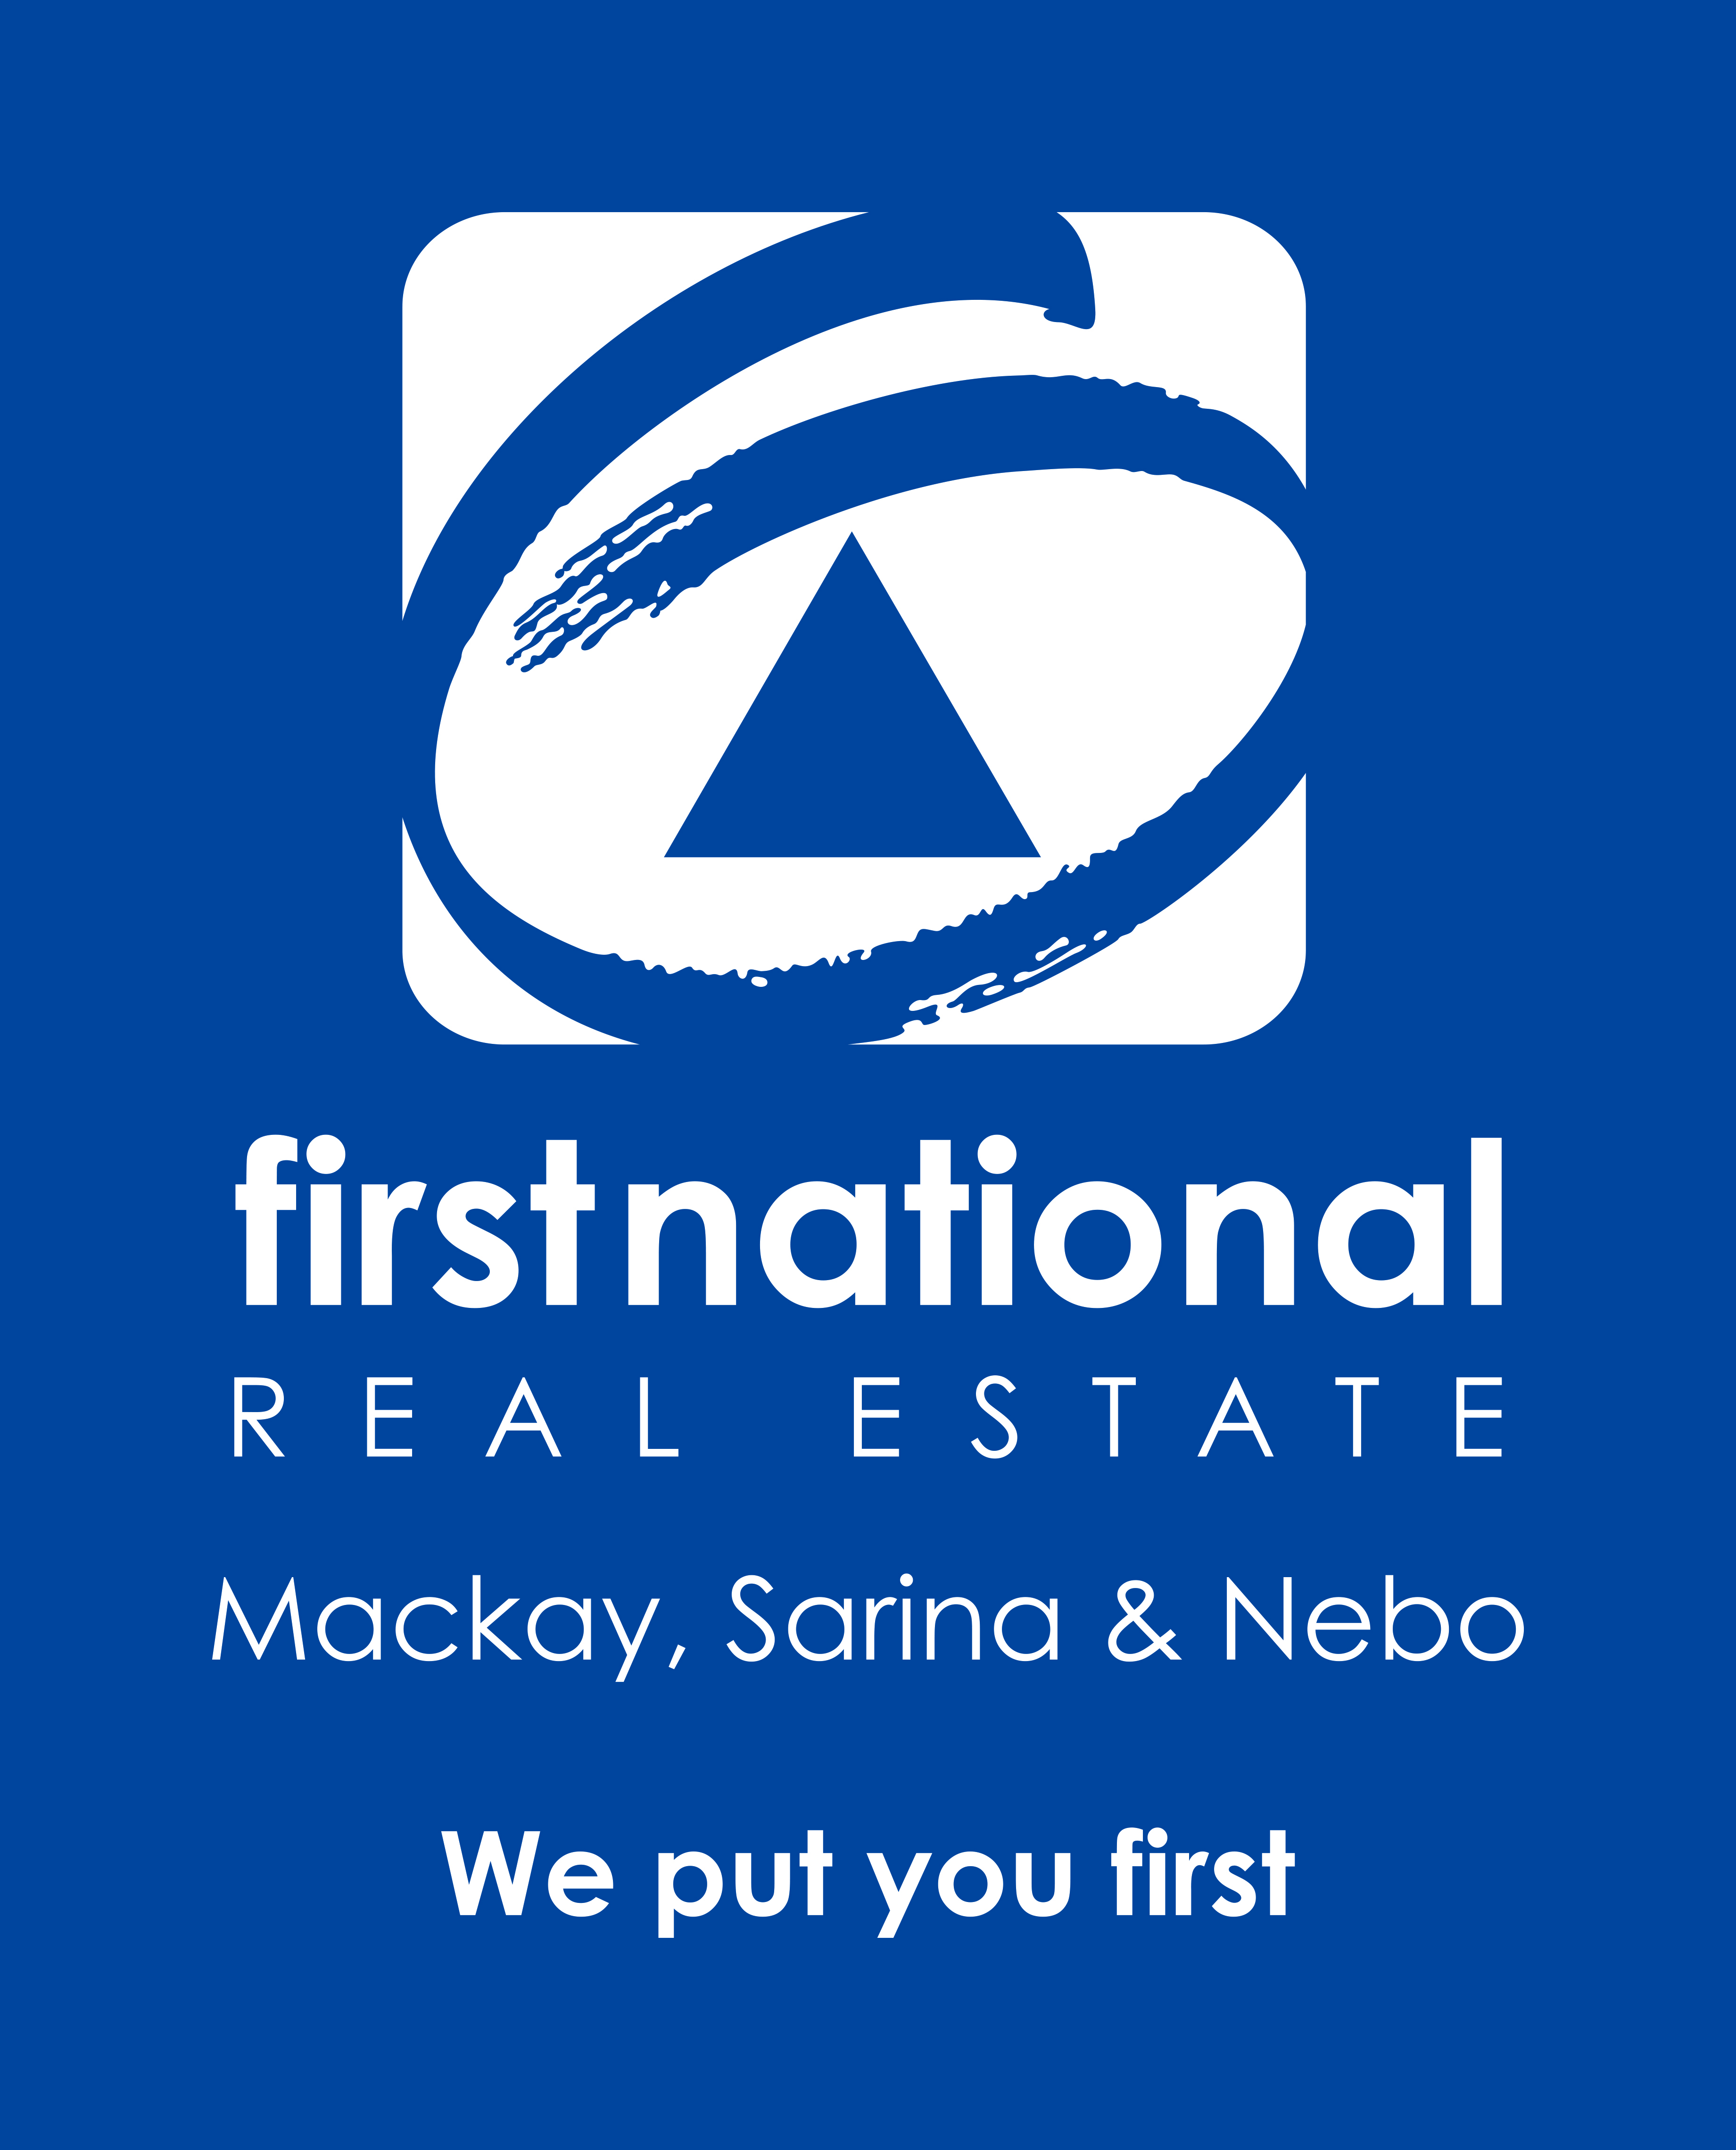 First National Real Estate, Mackay